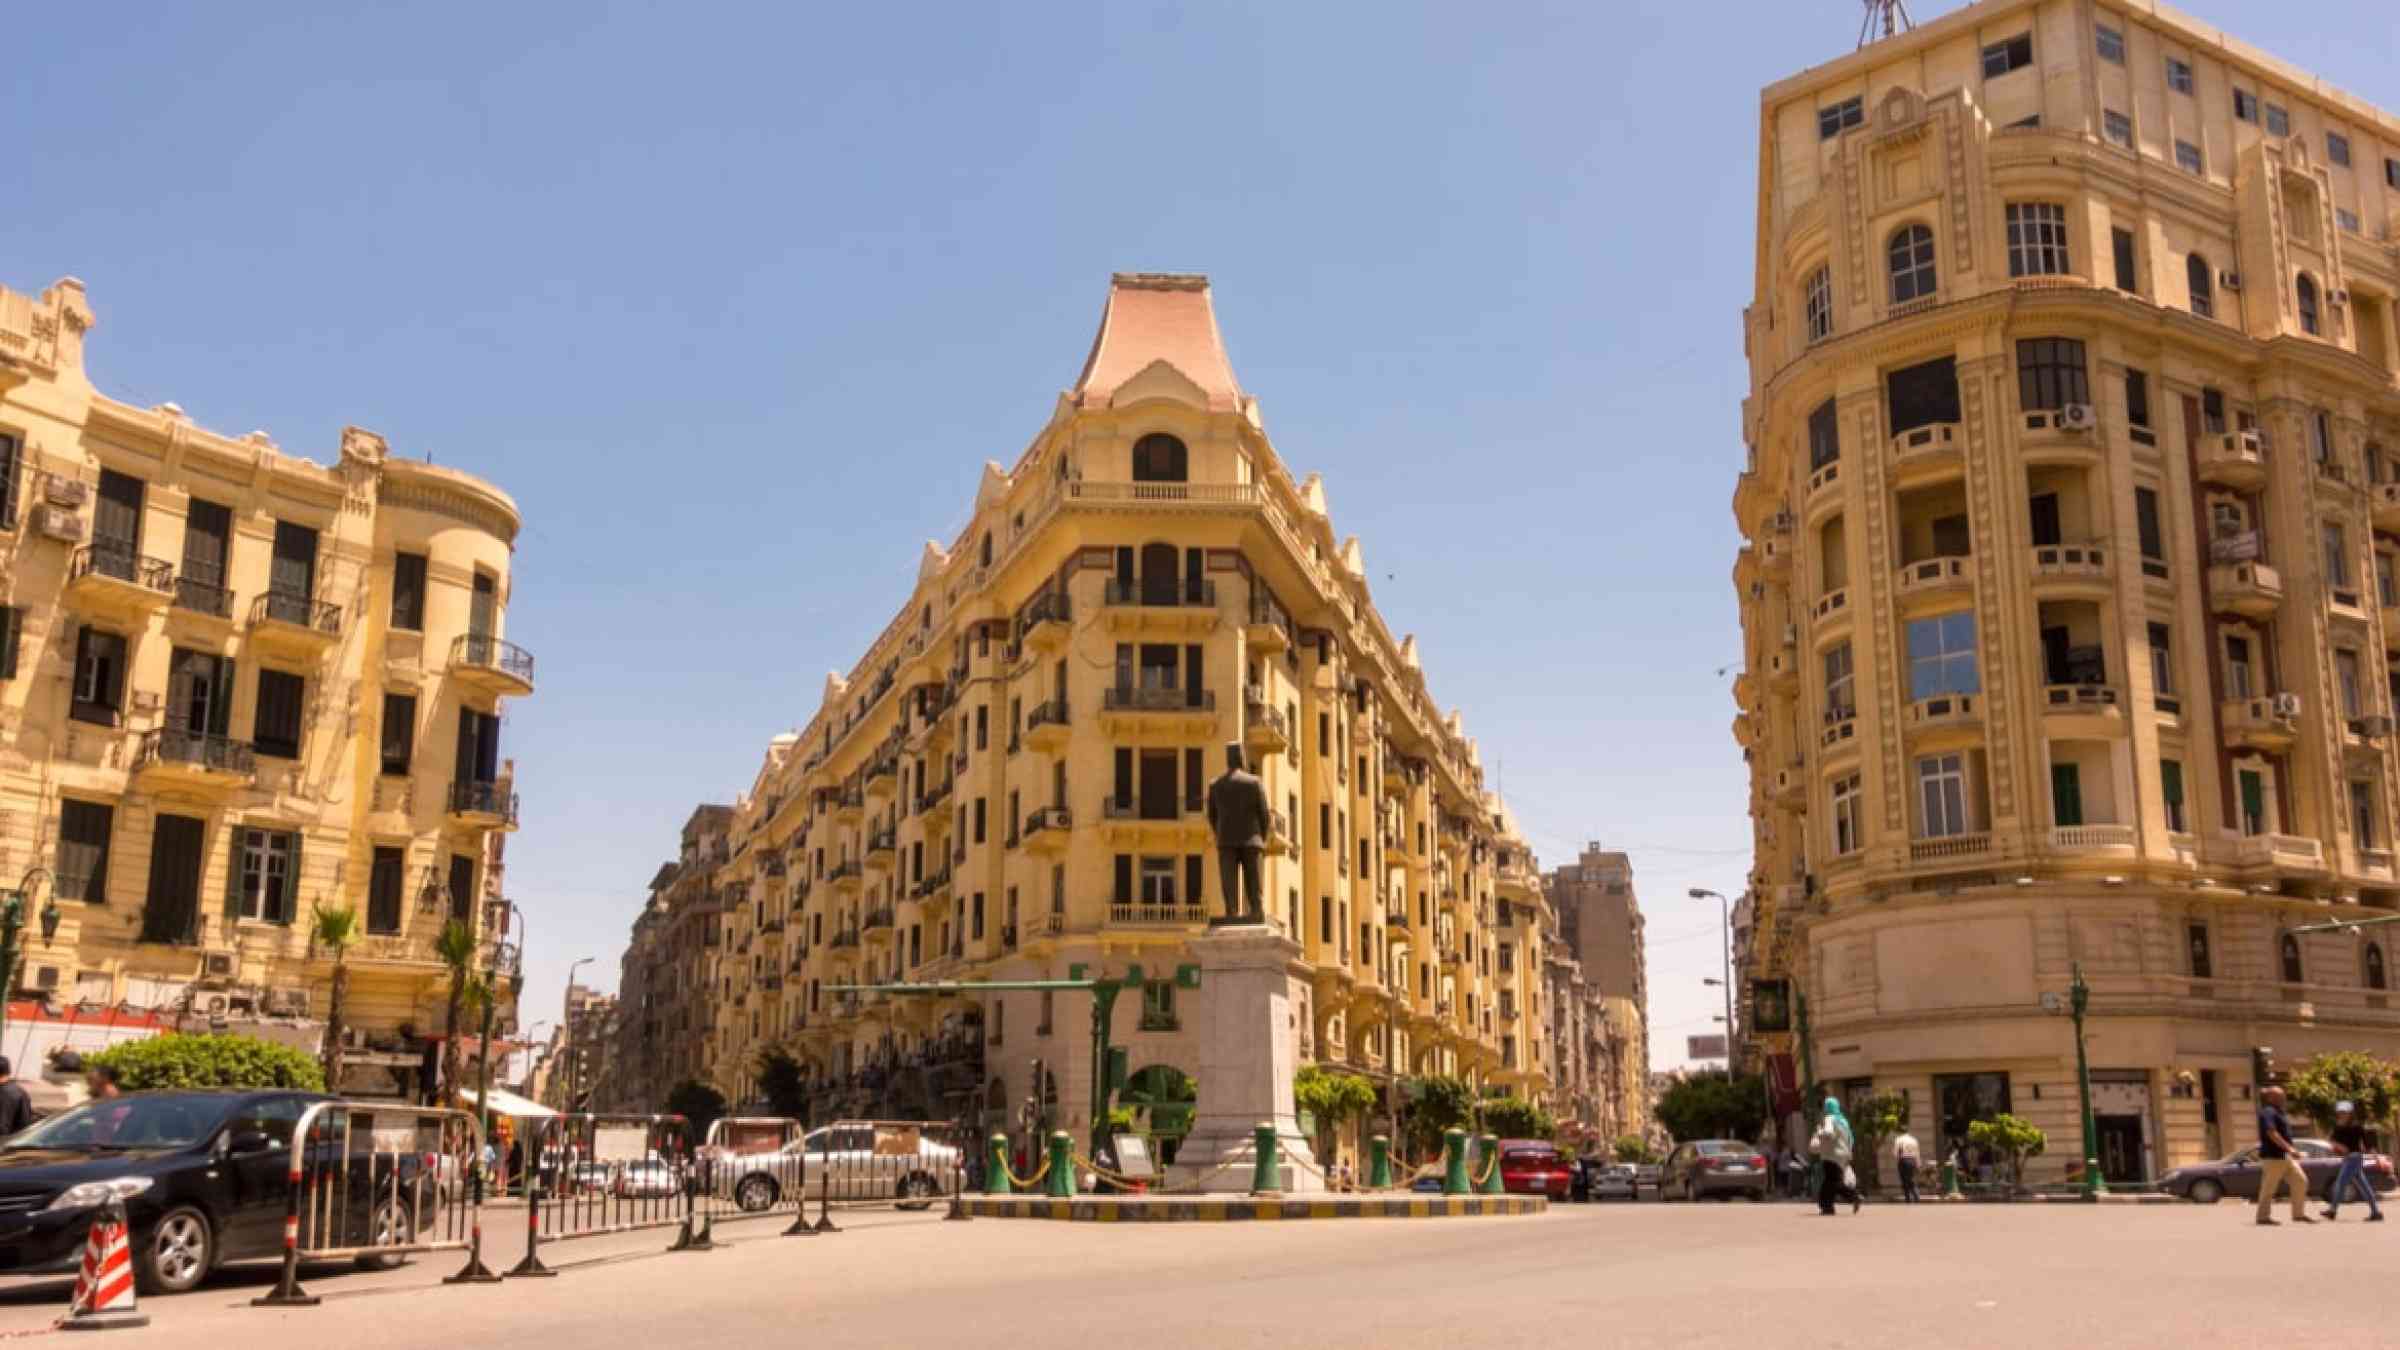 Talaat Harb square in Cairo, Egypt